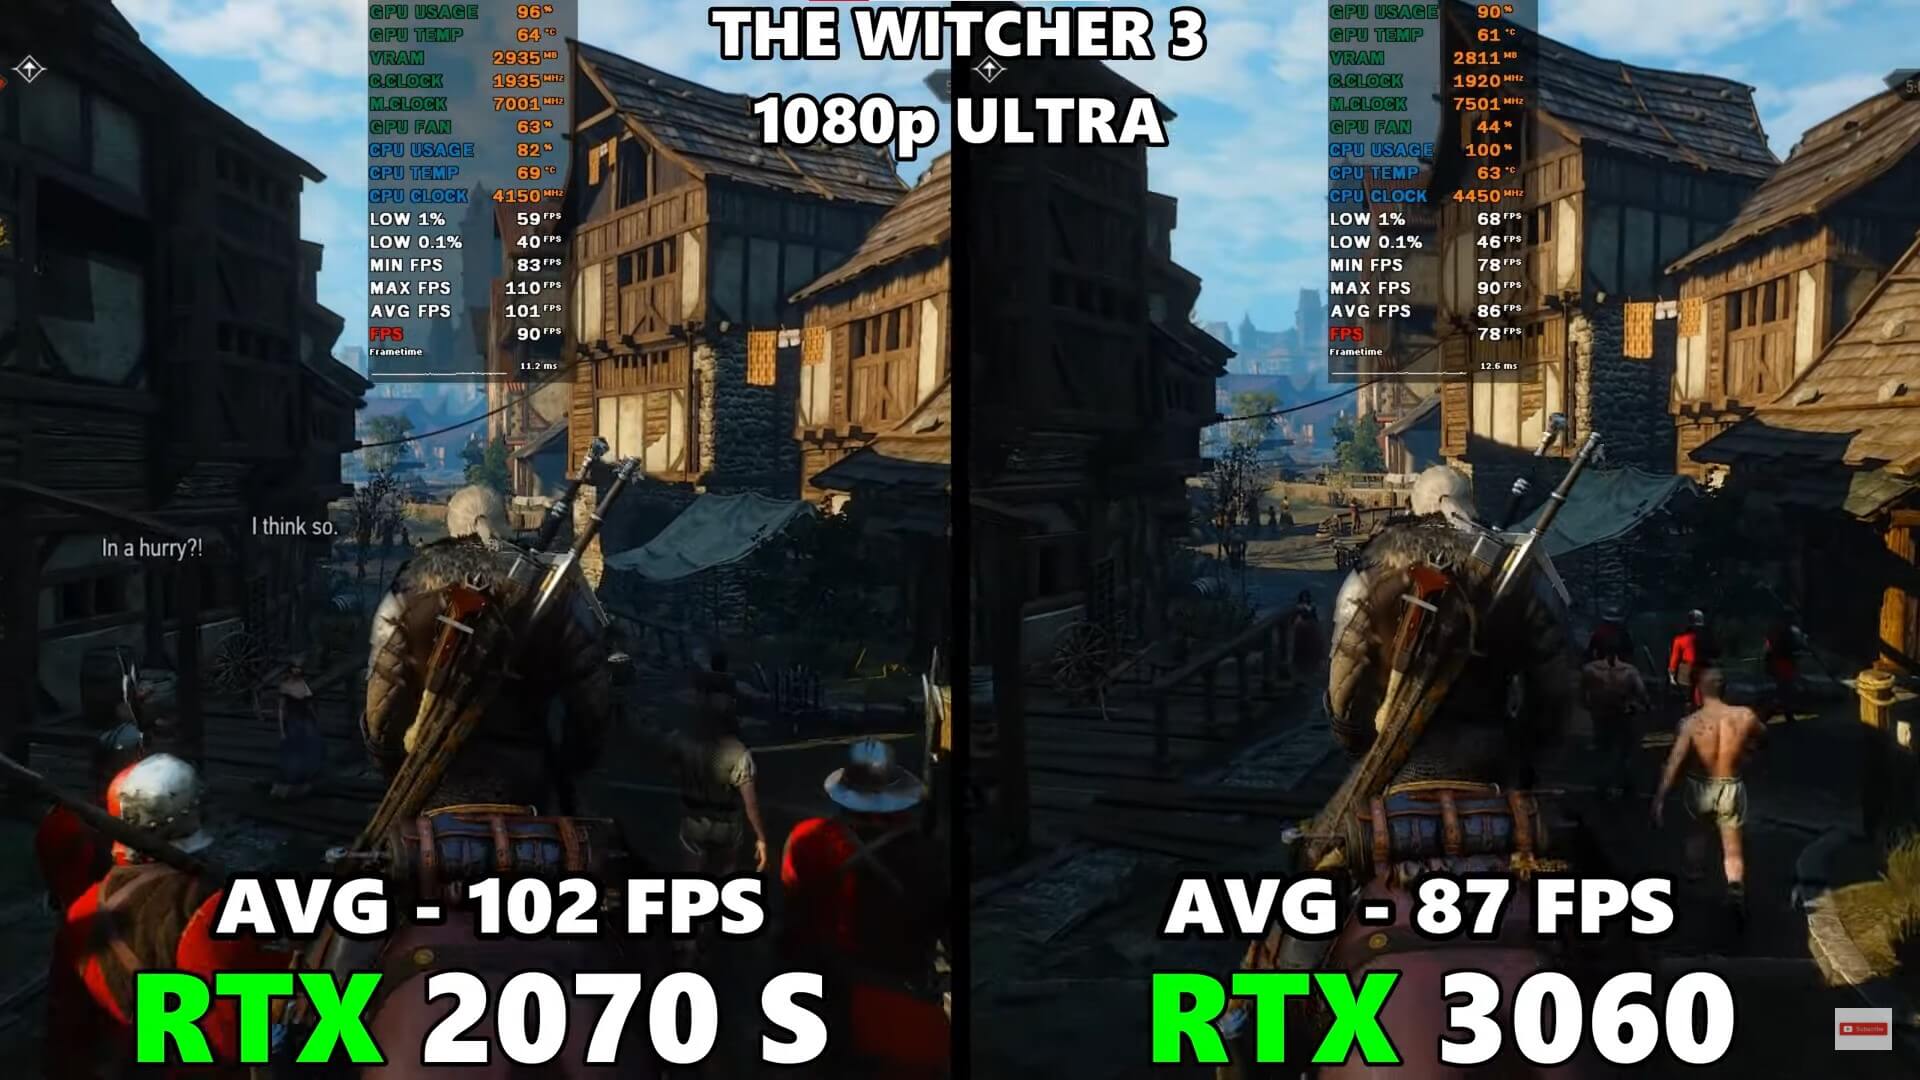 Witcher 3 performance benchmark for RTX 2070 Super Vs. 3060.